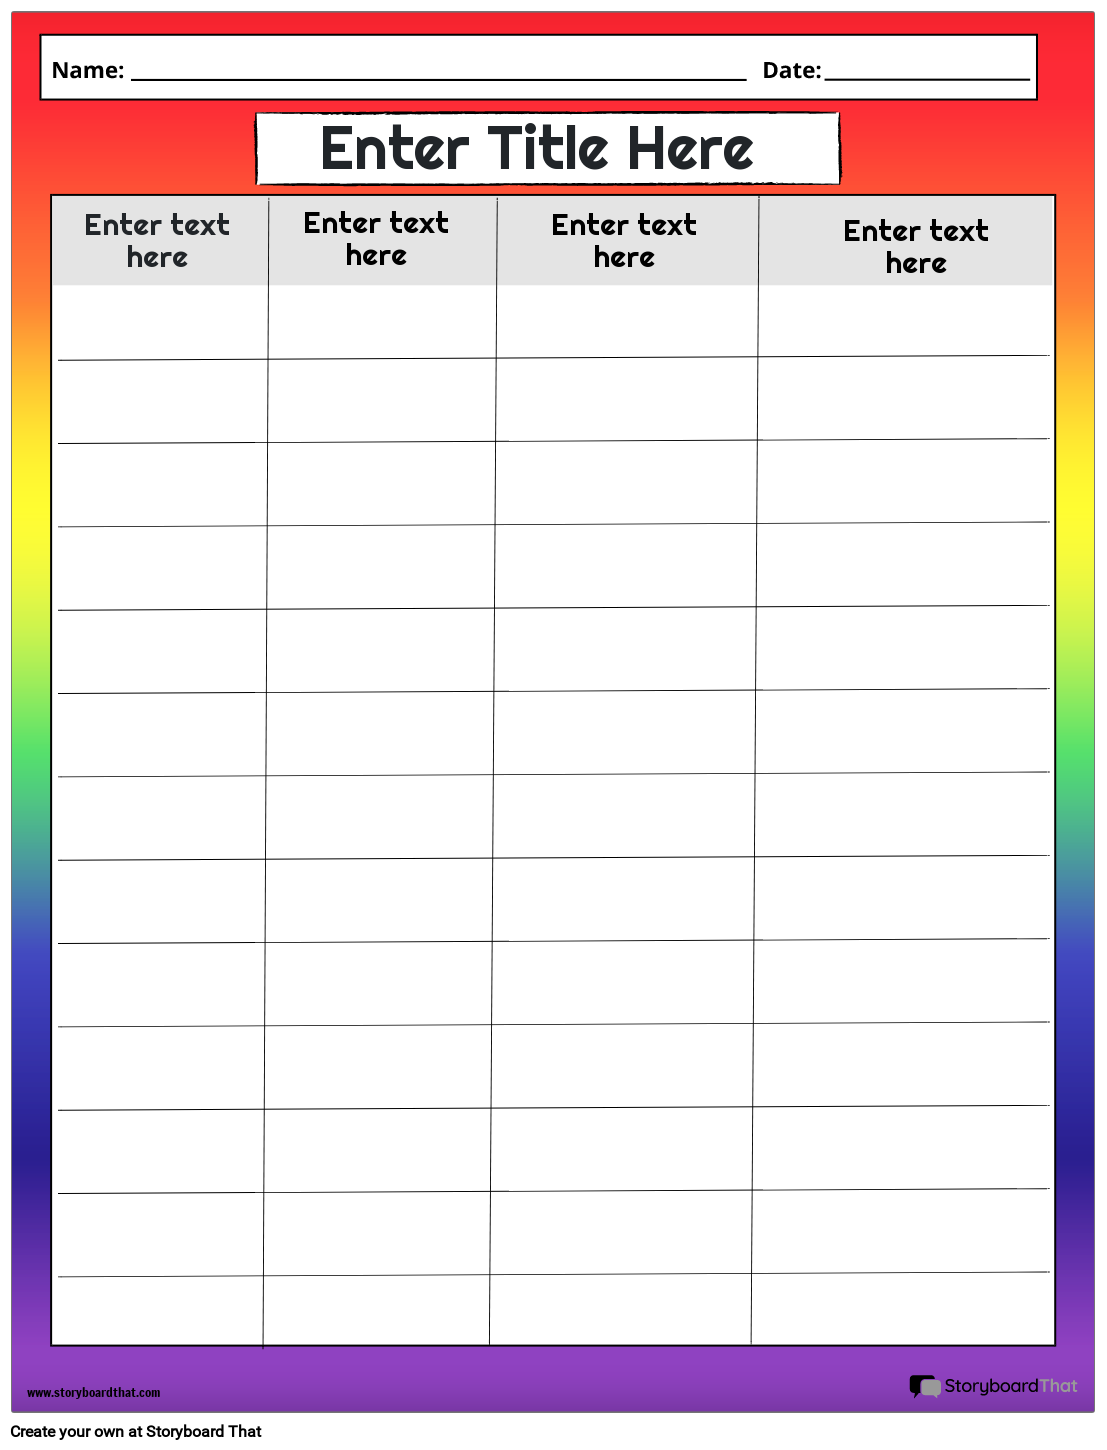 Table Worksheet Template with Bright Colorful Background